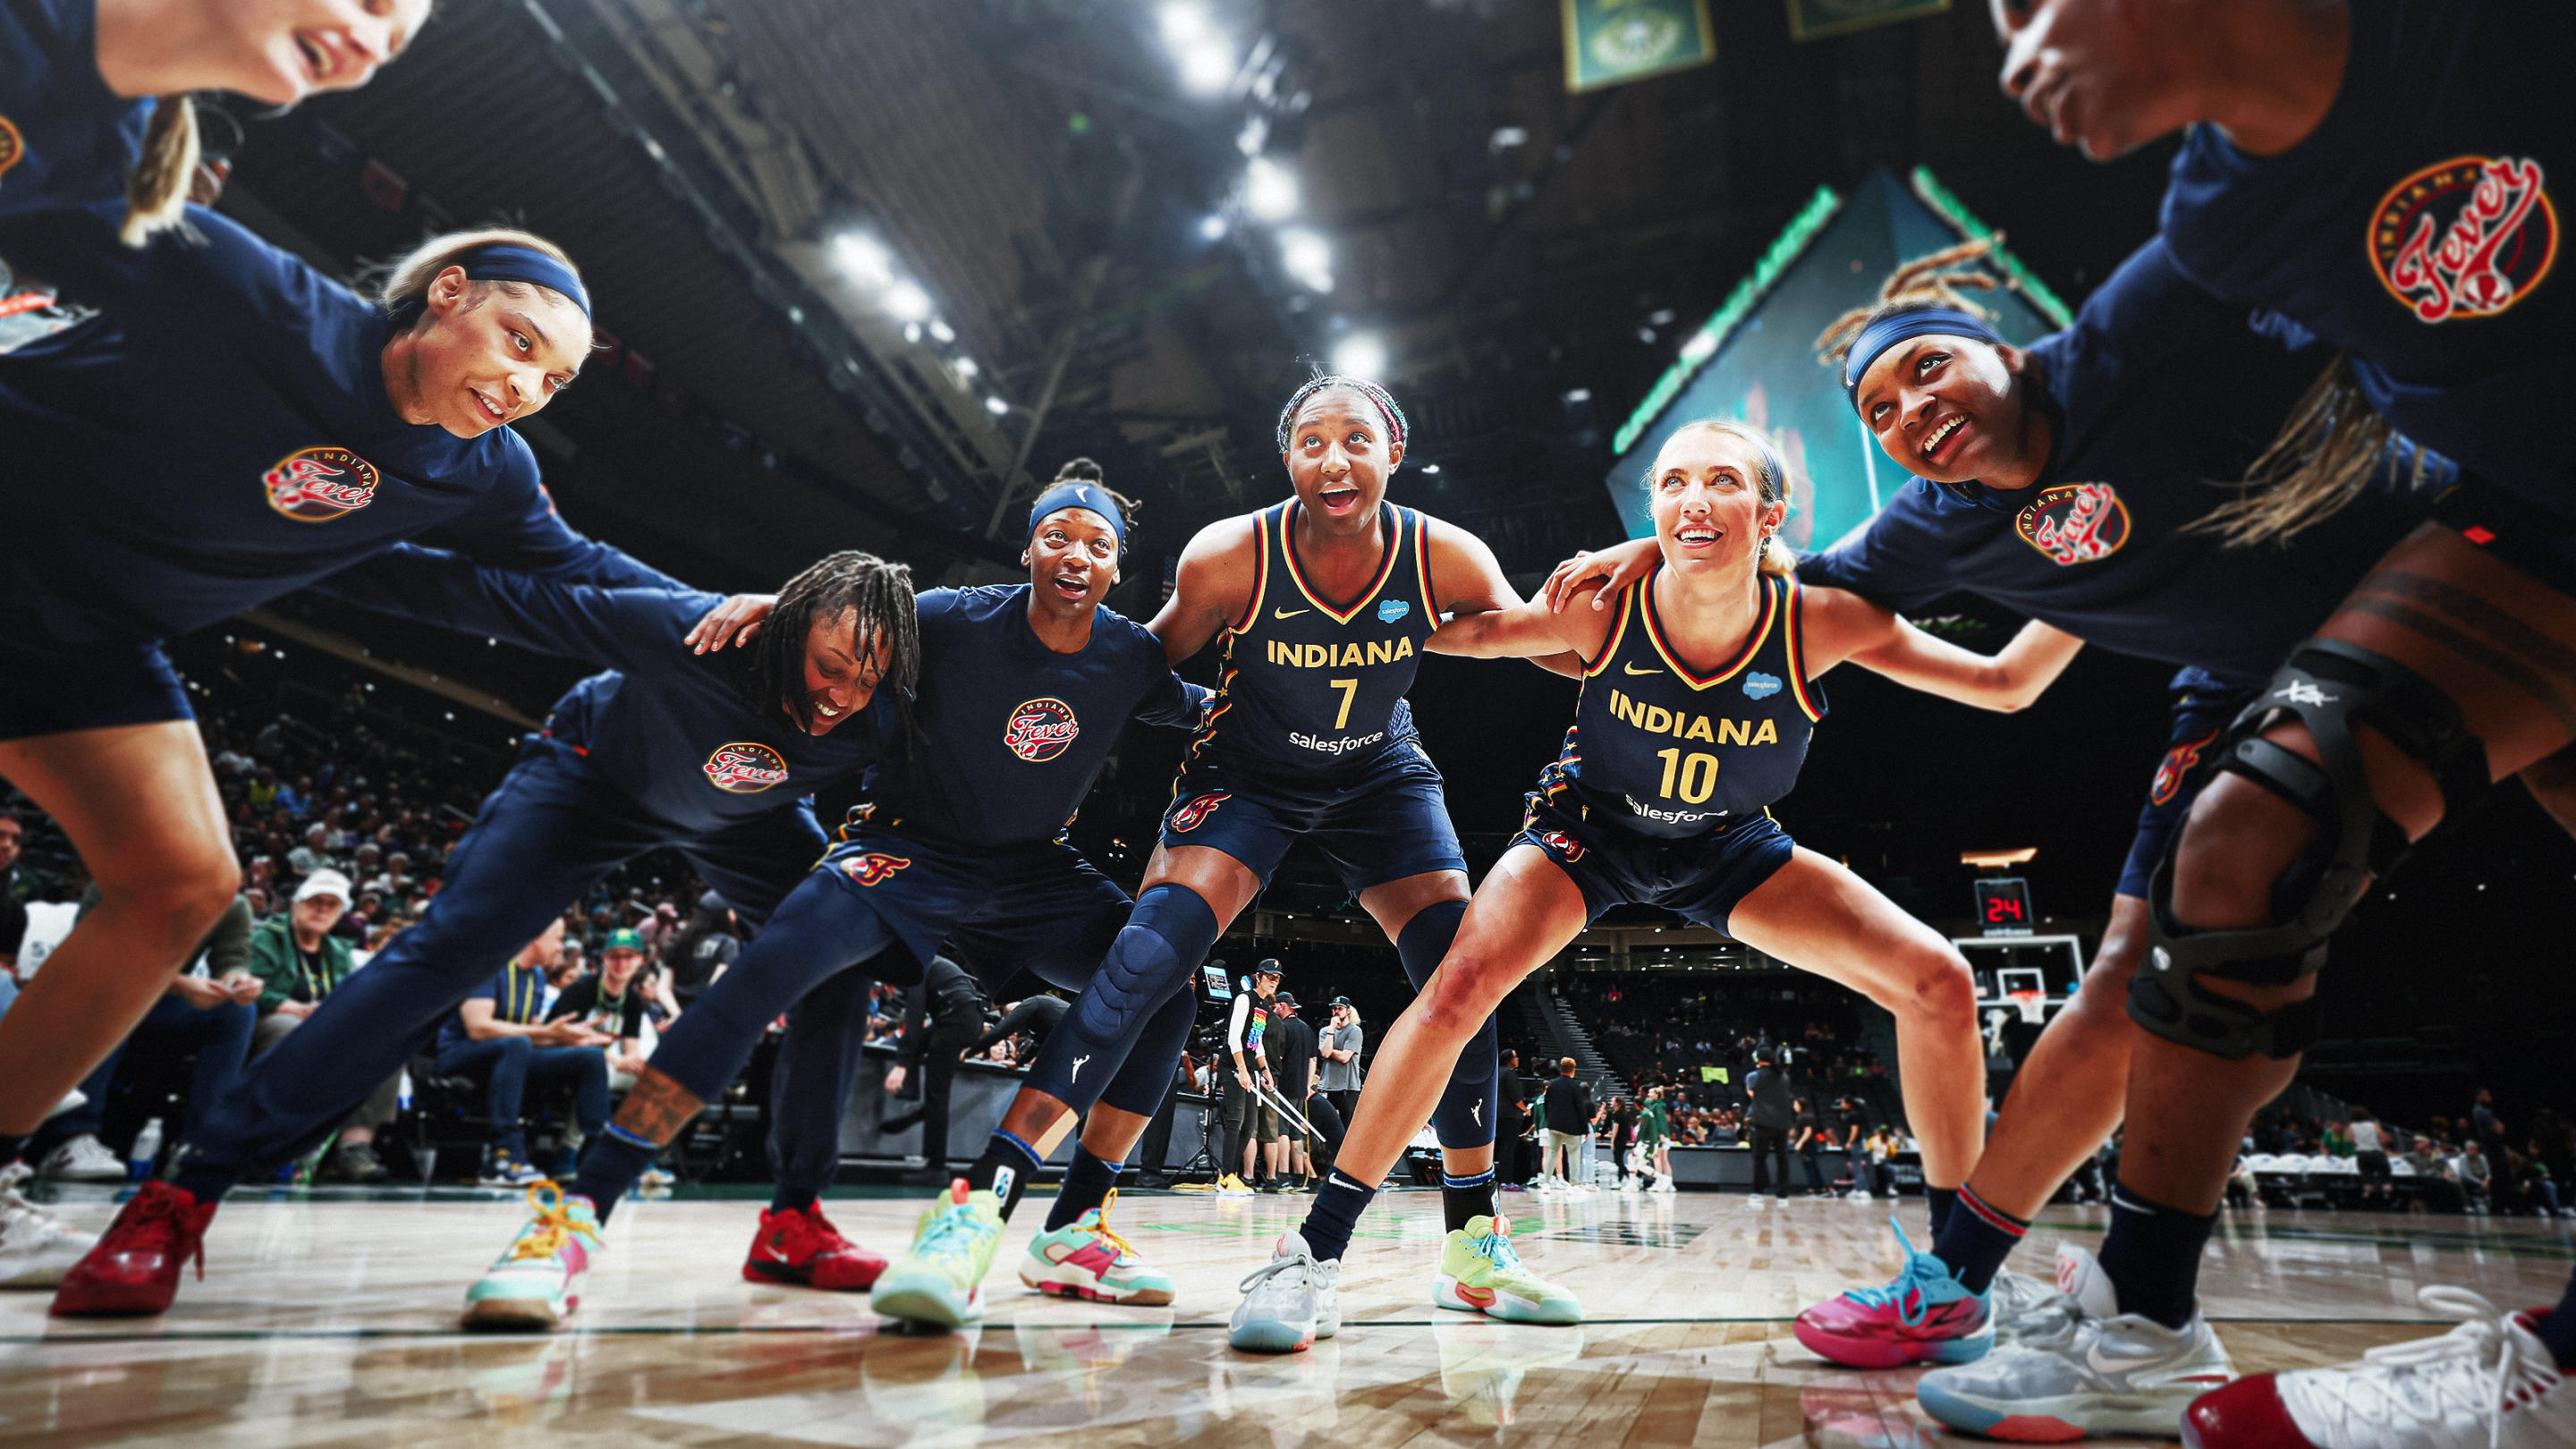 Aliyah Boston, center, helped the Indiana Fever take a big leap in Year 2 of their rebuild. (Photo by Steph Chambers/Getty Images)